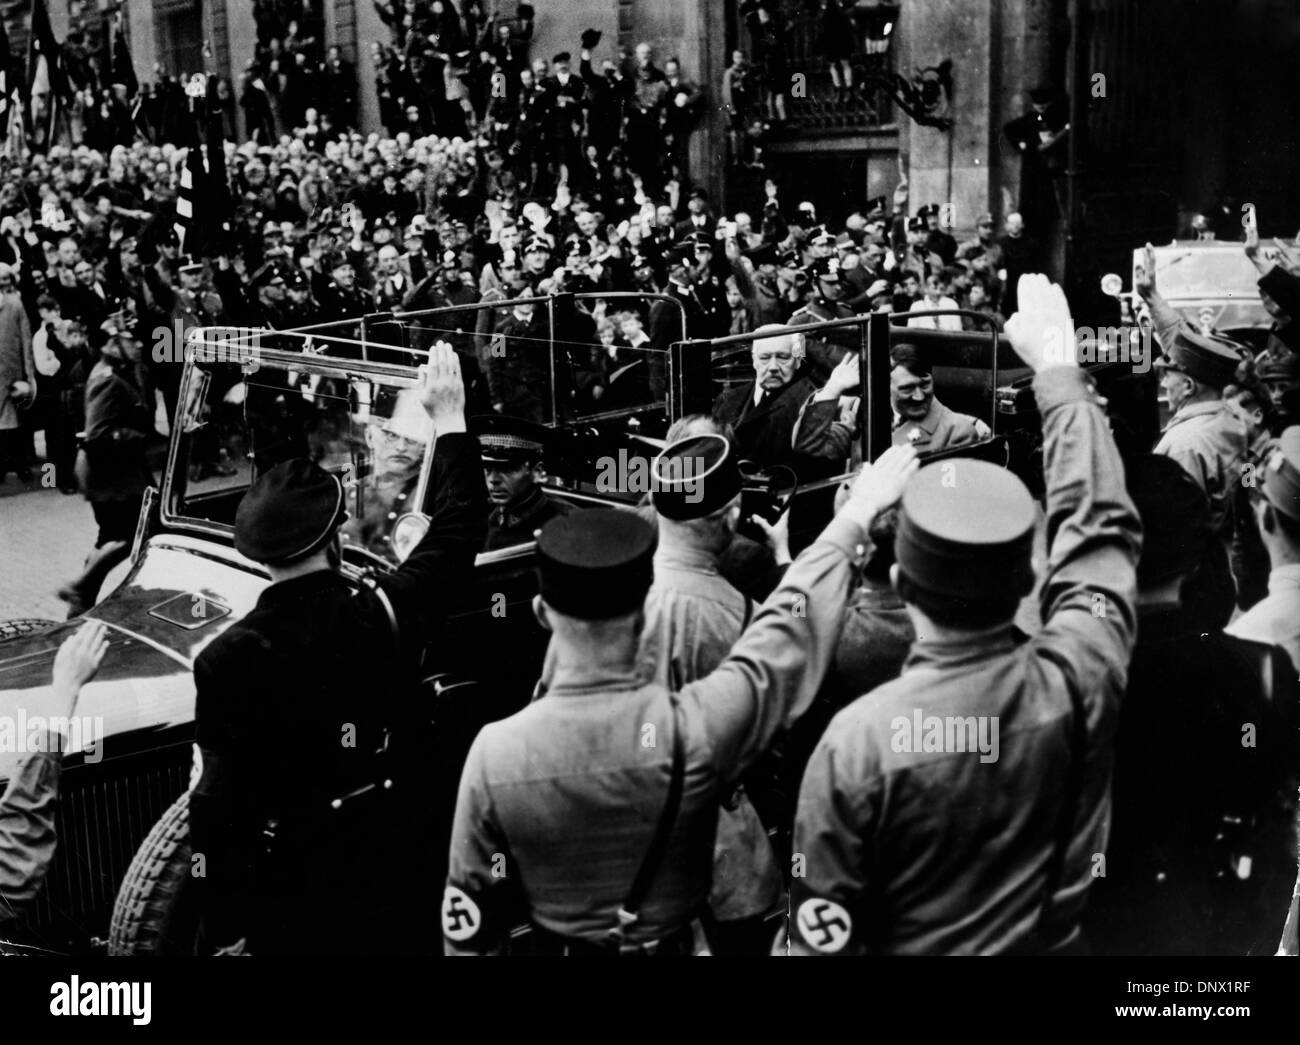 May 1, 1933 - Berlin, Germany - German Reich President PAUL VON HINDENBURG and Nazi leader ADOLF HITLER are saluted by a crowd during the celebrations of the May Day in Germany. (Credit Image: © KEYSTONE Pictures USA/ZUMAPRESS.com) Stock Photo